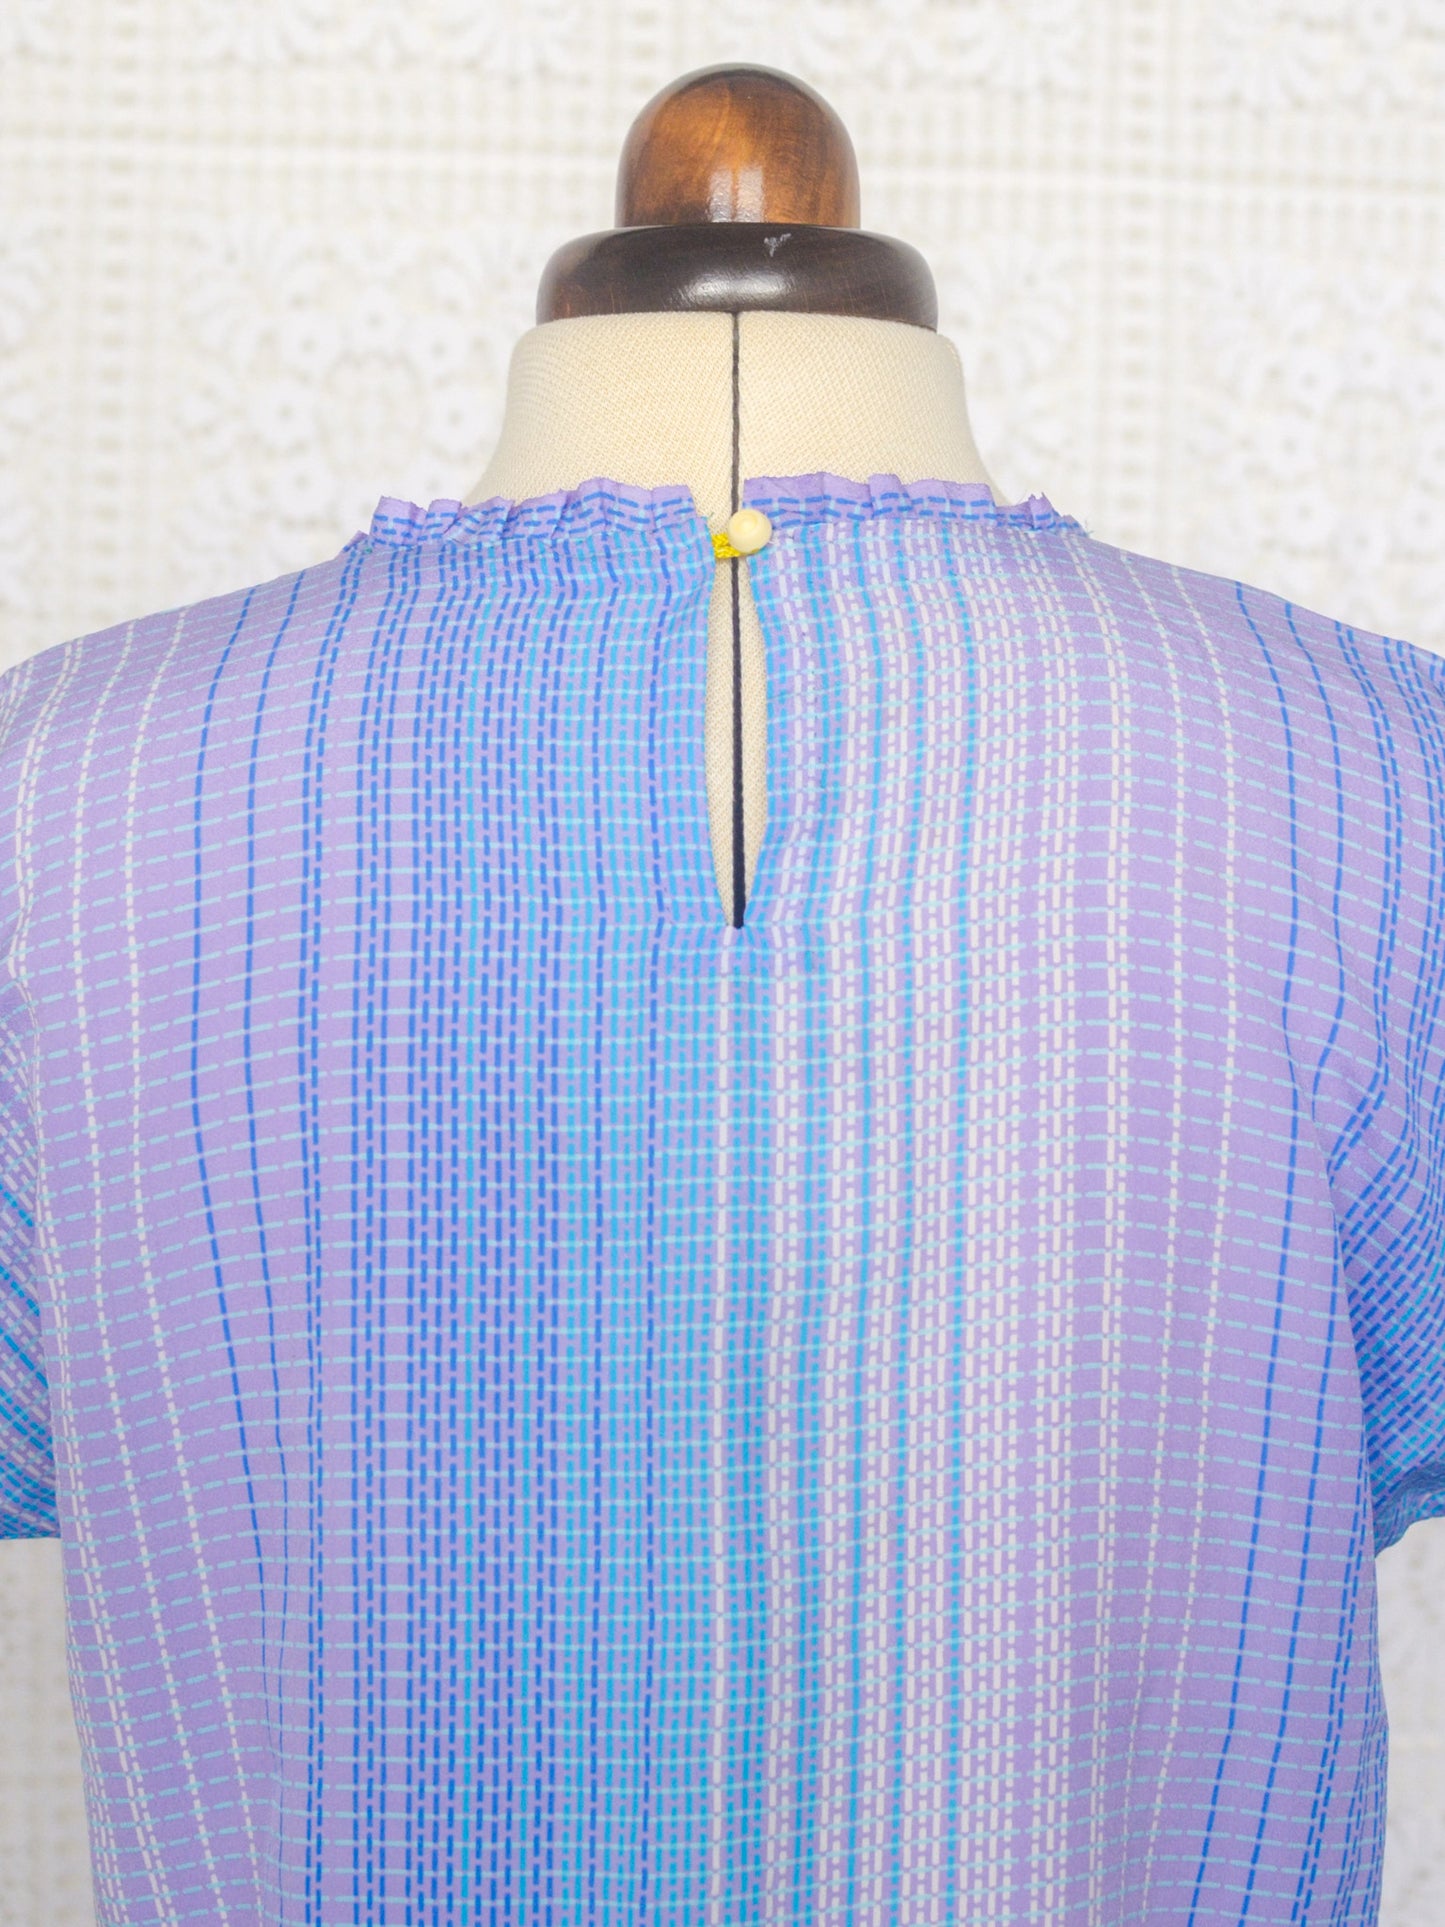 1980s style handmade Japanese lilac and blue striped top